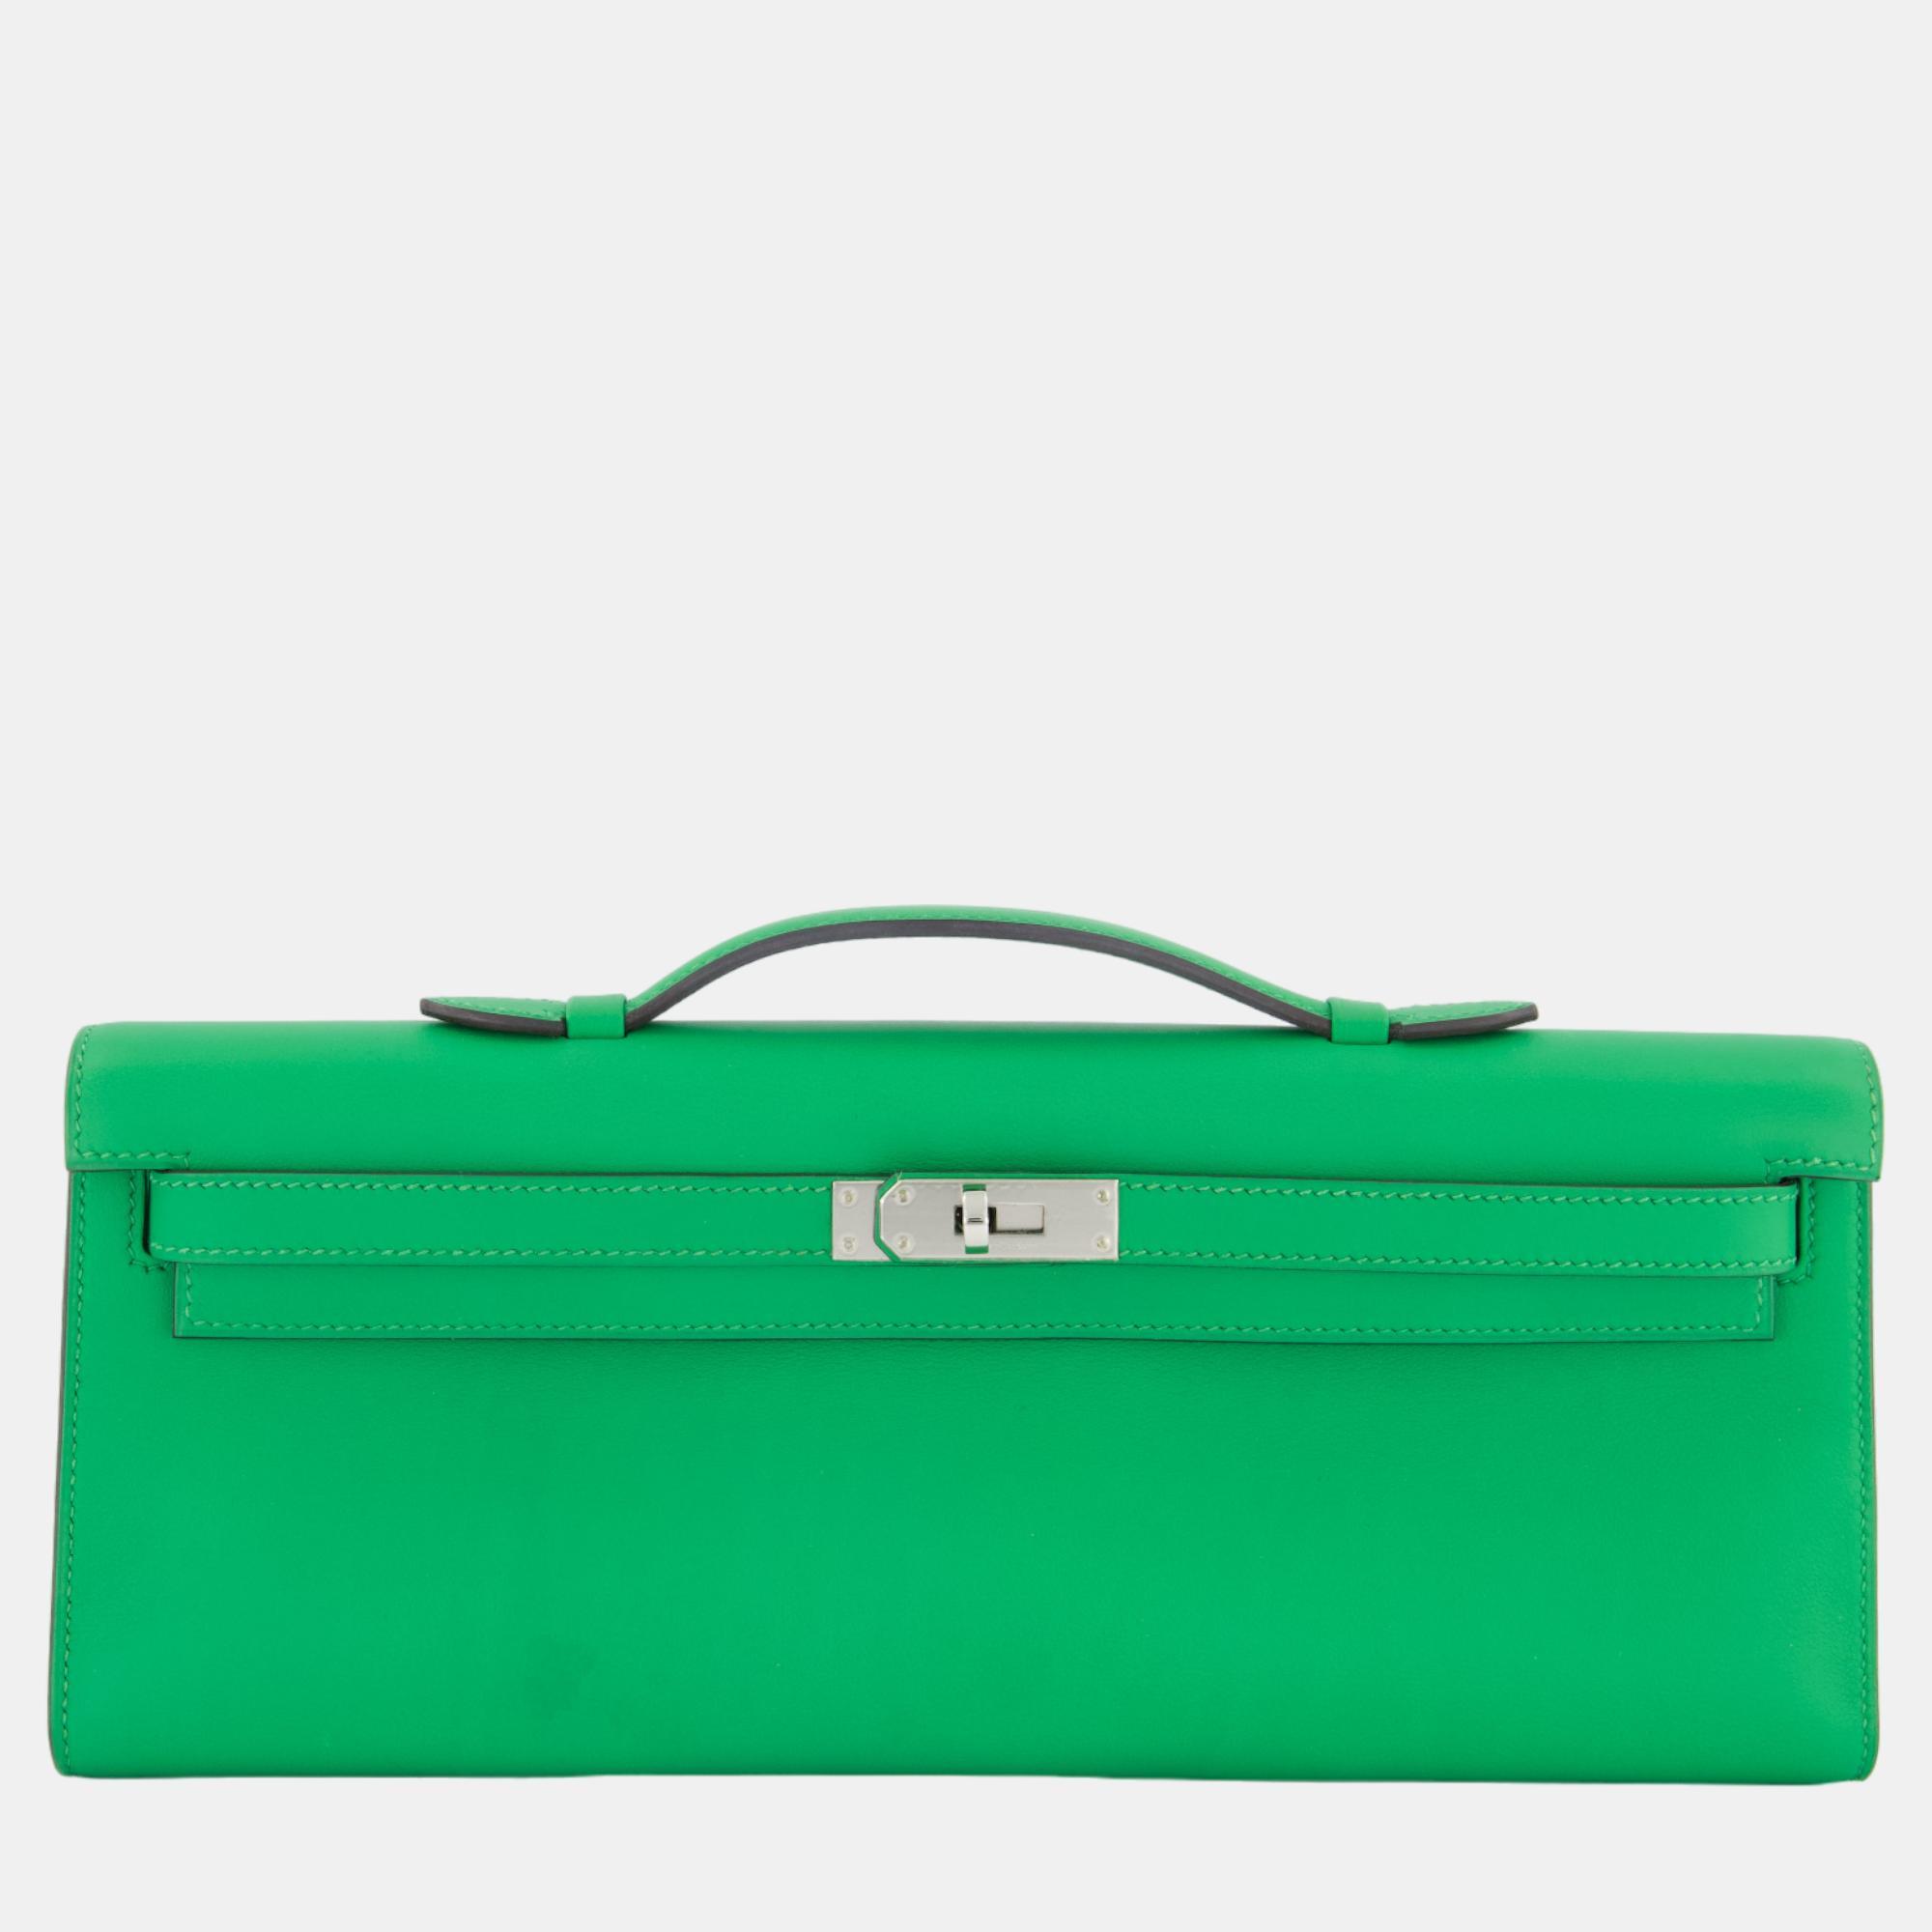 Hermes kelly cut bag in bamboo swift leather with palladium hardware